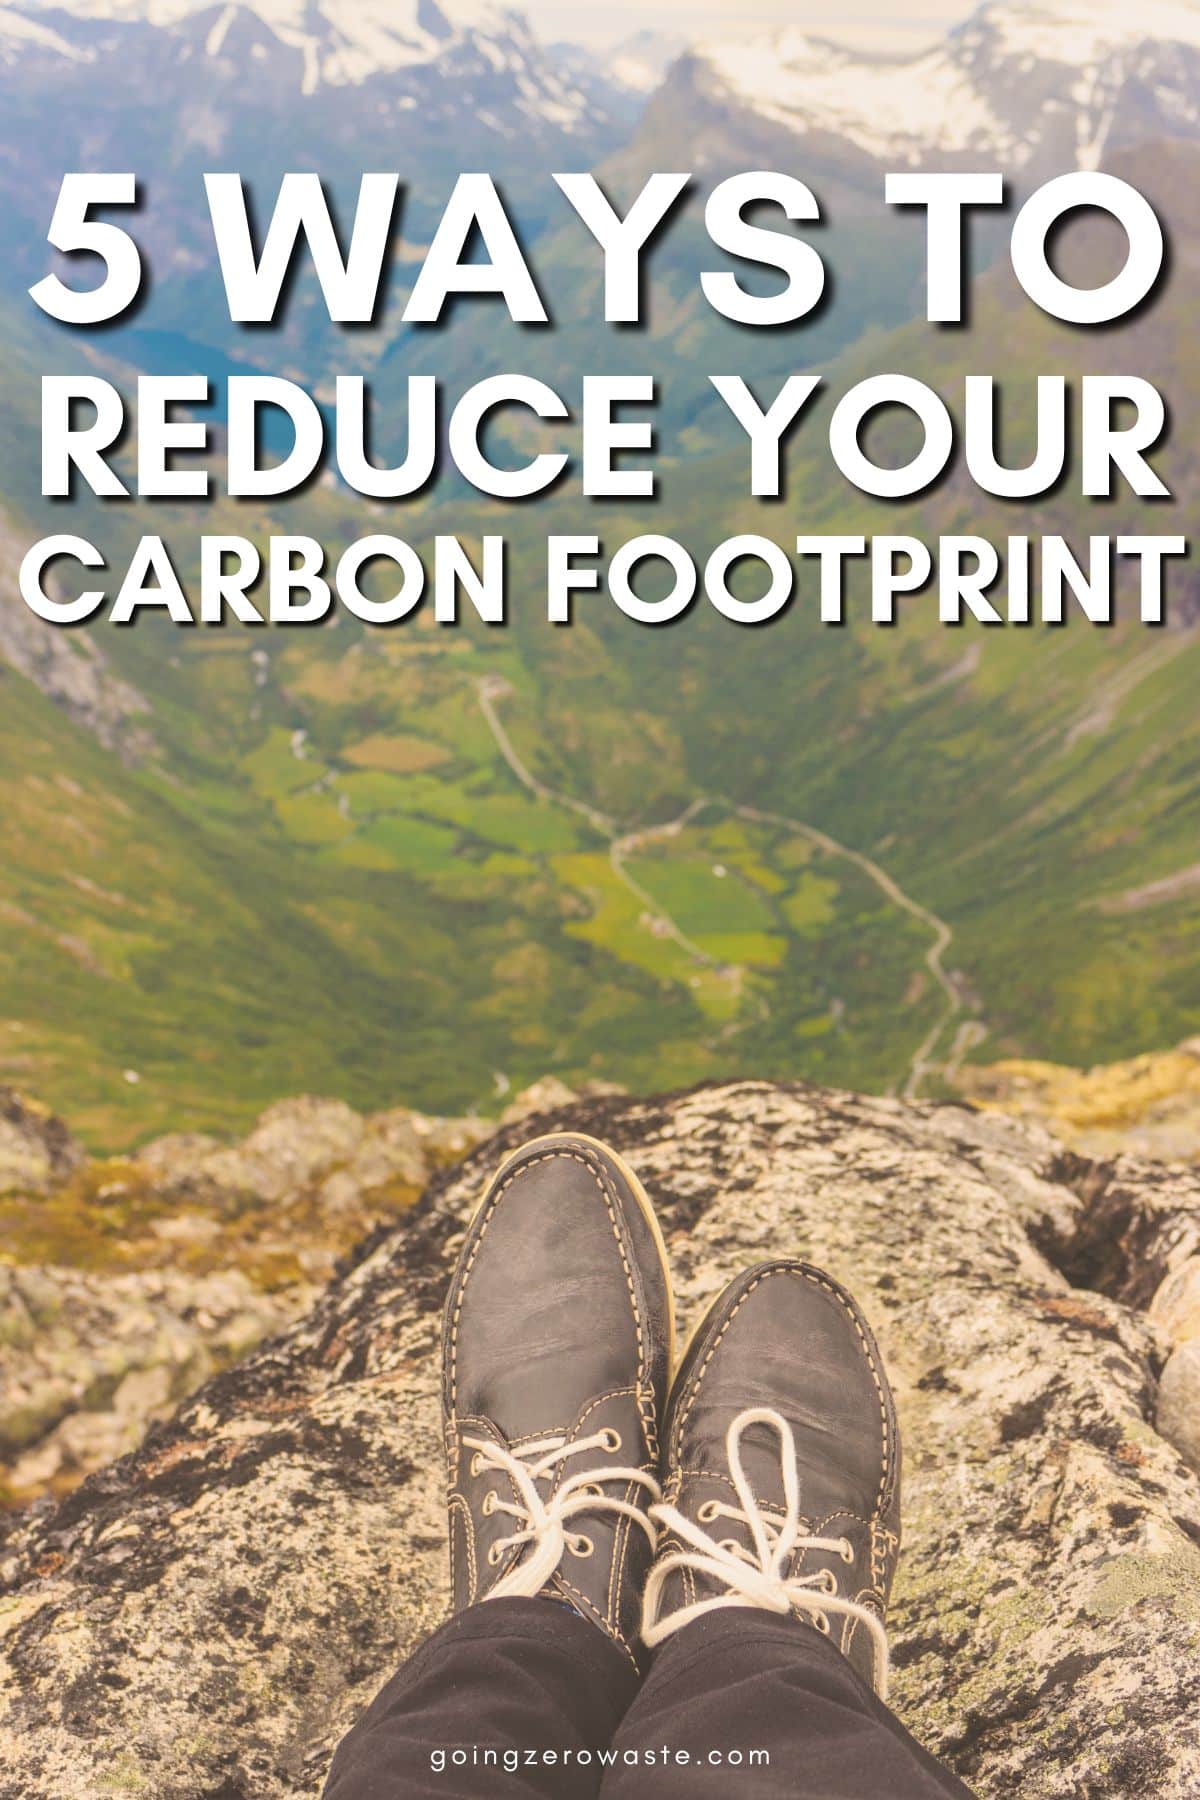 How to Reduce the Carbon Footprint of Your Paper Towels?